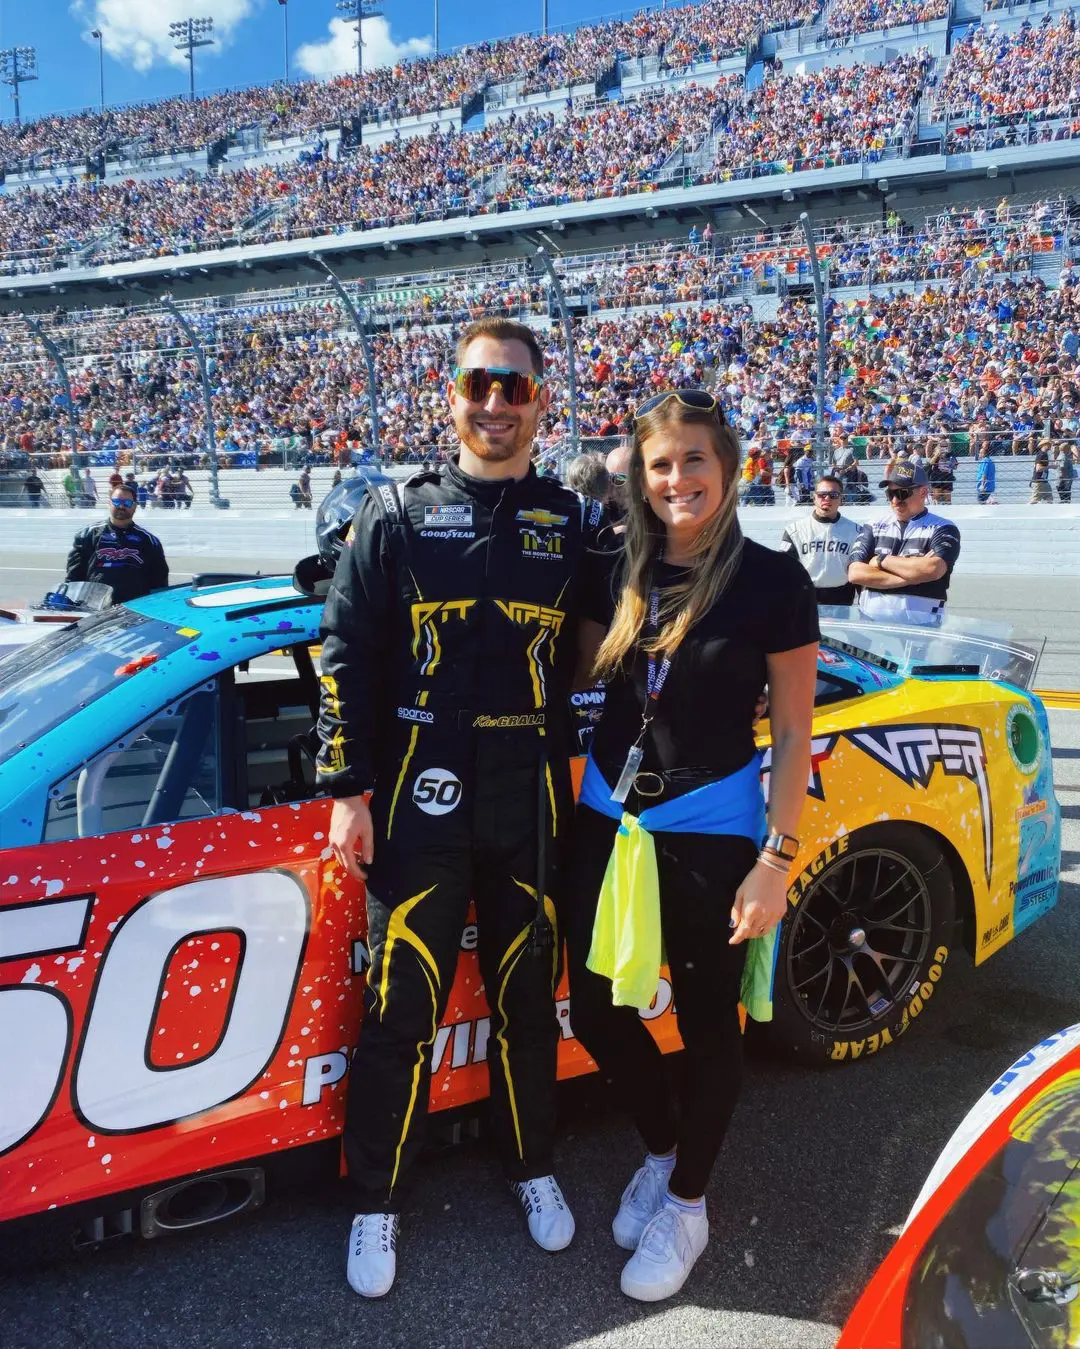 Morgan shares a post congratulating her boyfriend for his win in a race at Daytona International Speedway.